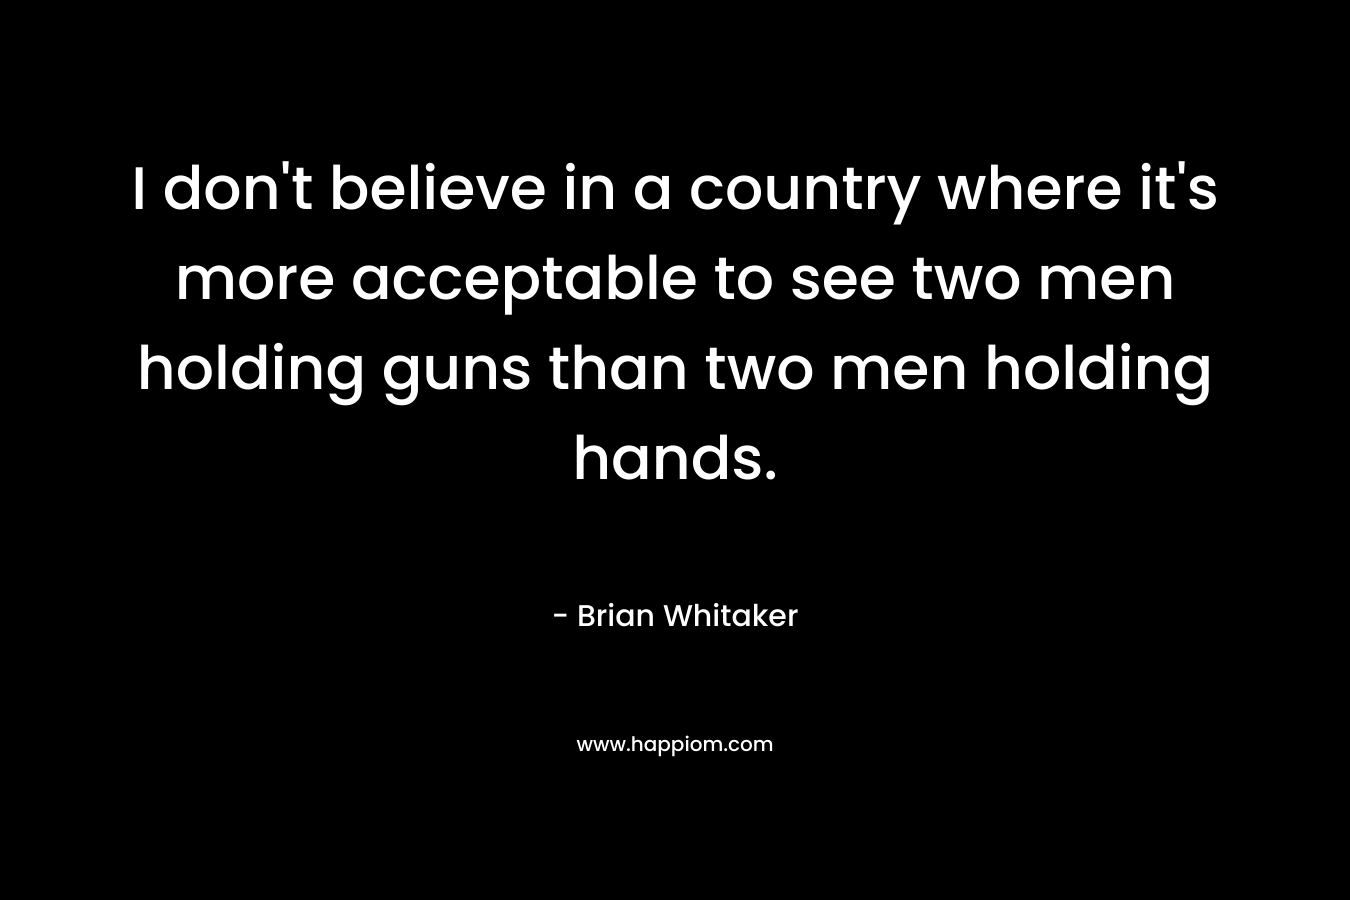 I don’t believe in a country where it’s more acceptable to see two men holding guns than two men holding hands. – Brian Whitaker